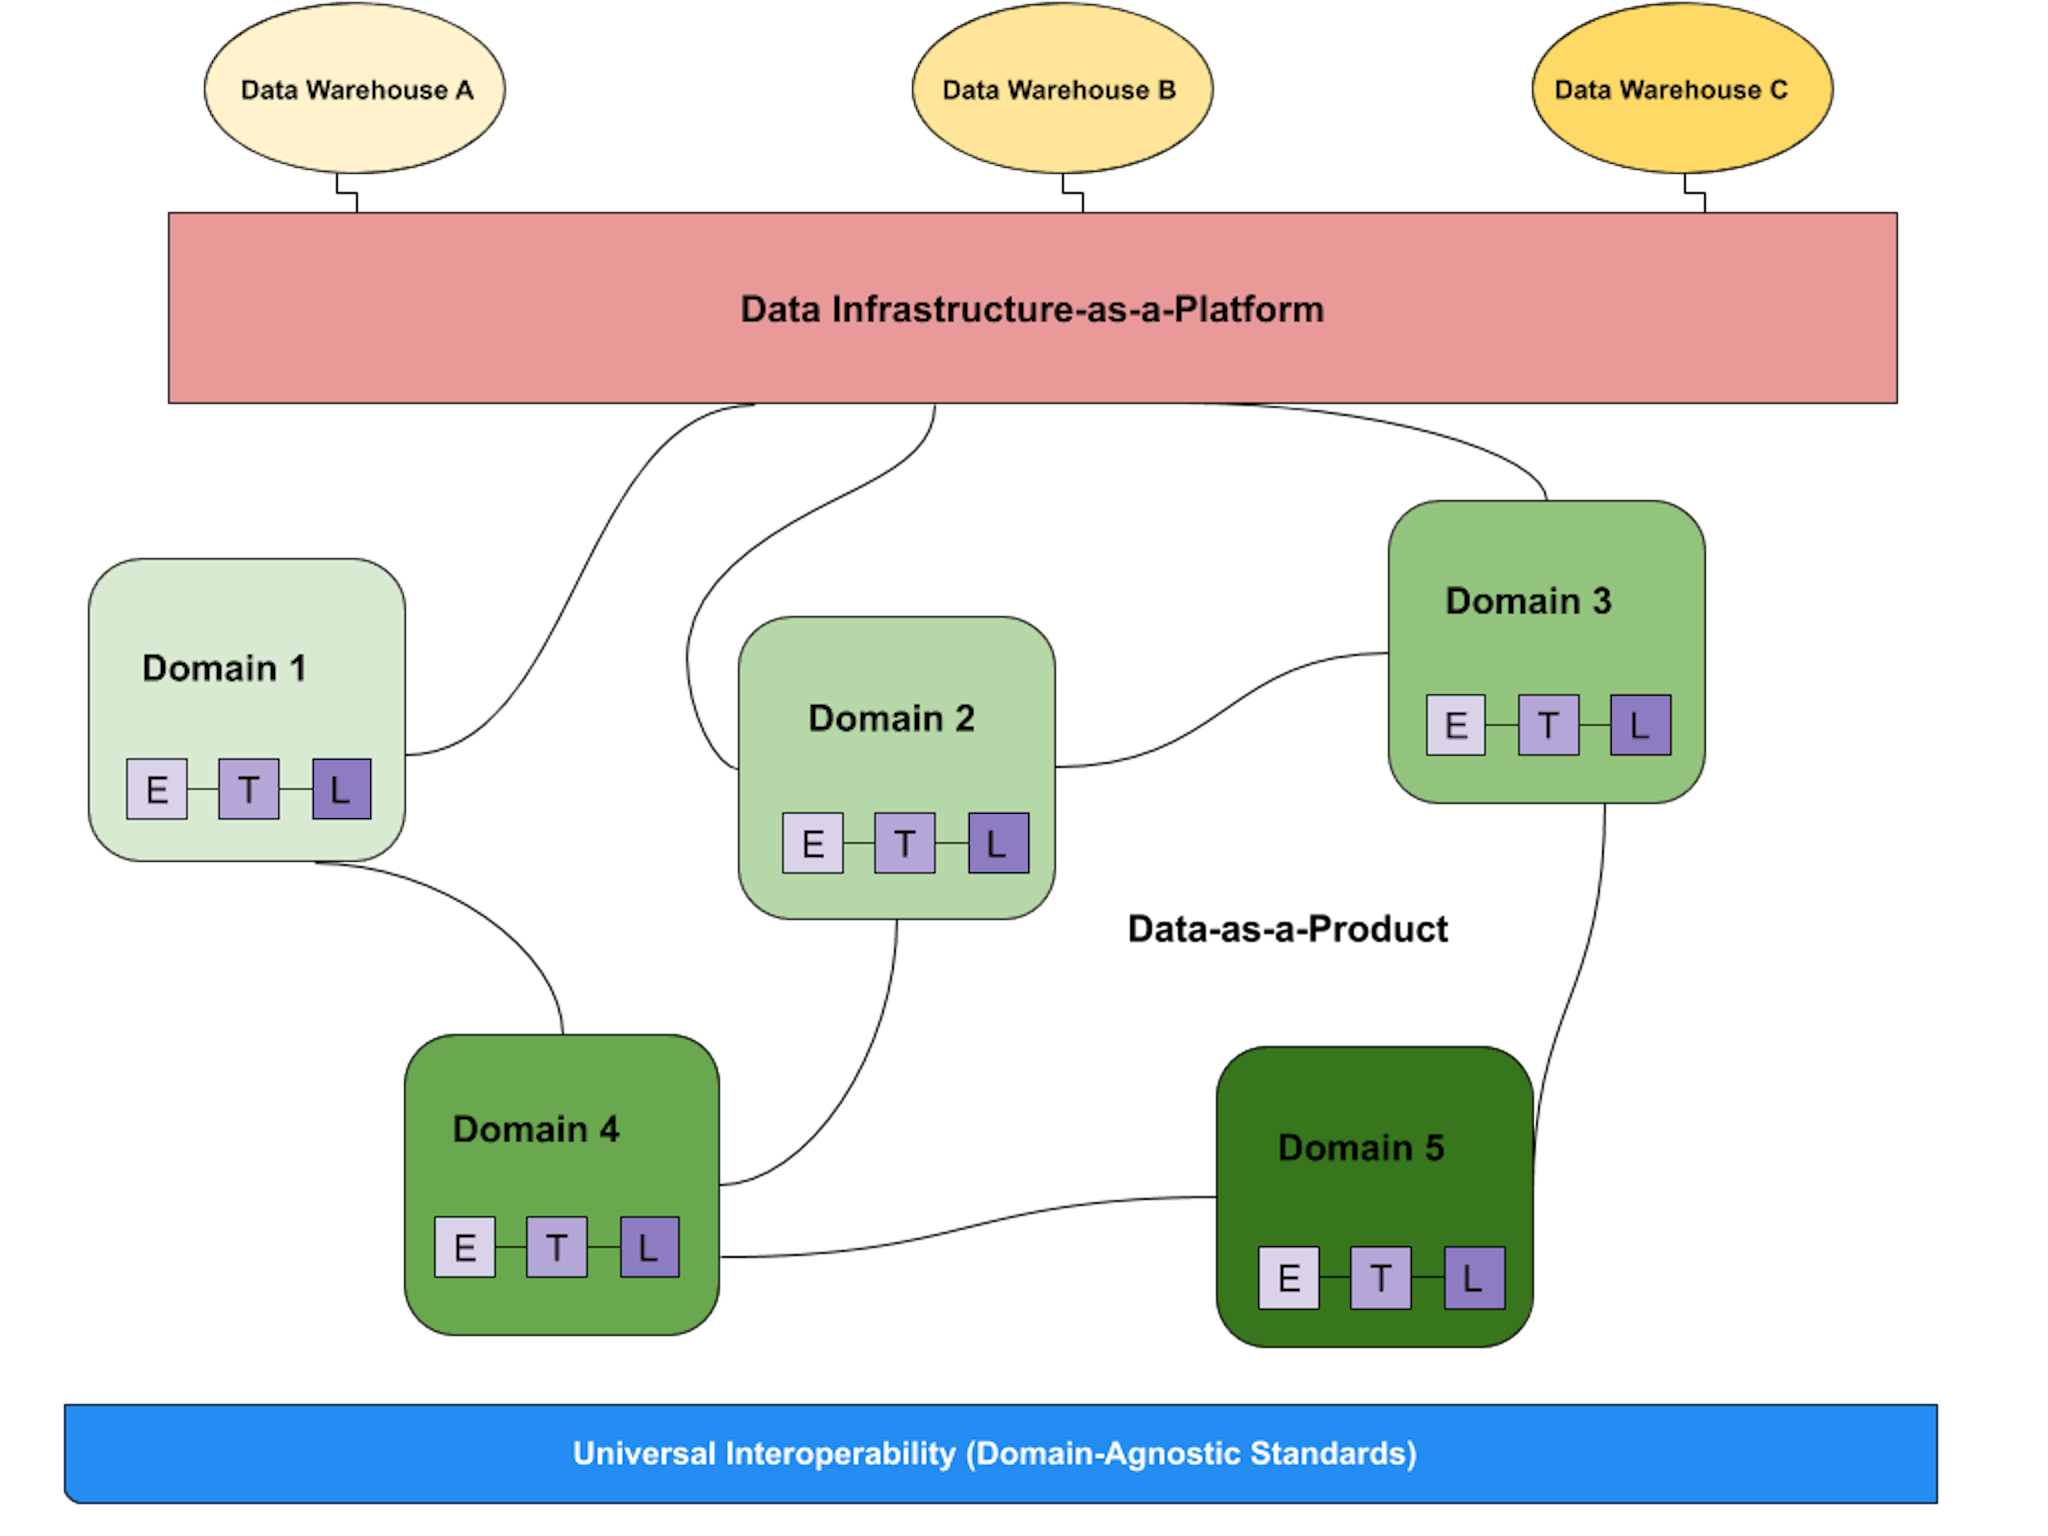 At a high level, a data mesh is composed of three separate components: data sources, data infrastructure, and domain-oriented data pipelines managed by functional owners. Underlying the data mesh architecture is a layer of universal interoperability, reflecting domain-agnostic standards, as well as observability and governance.